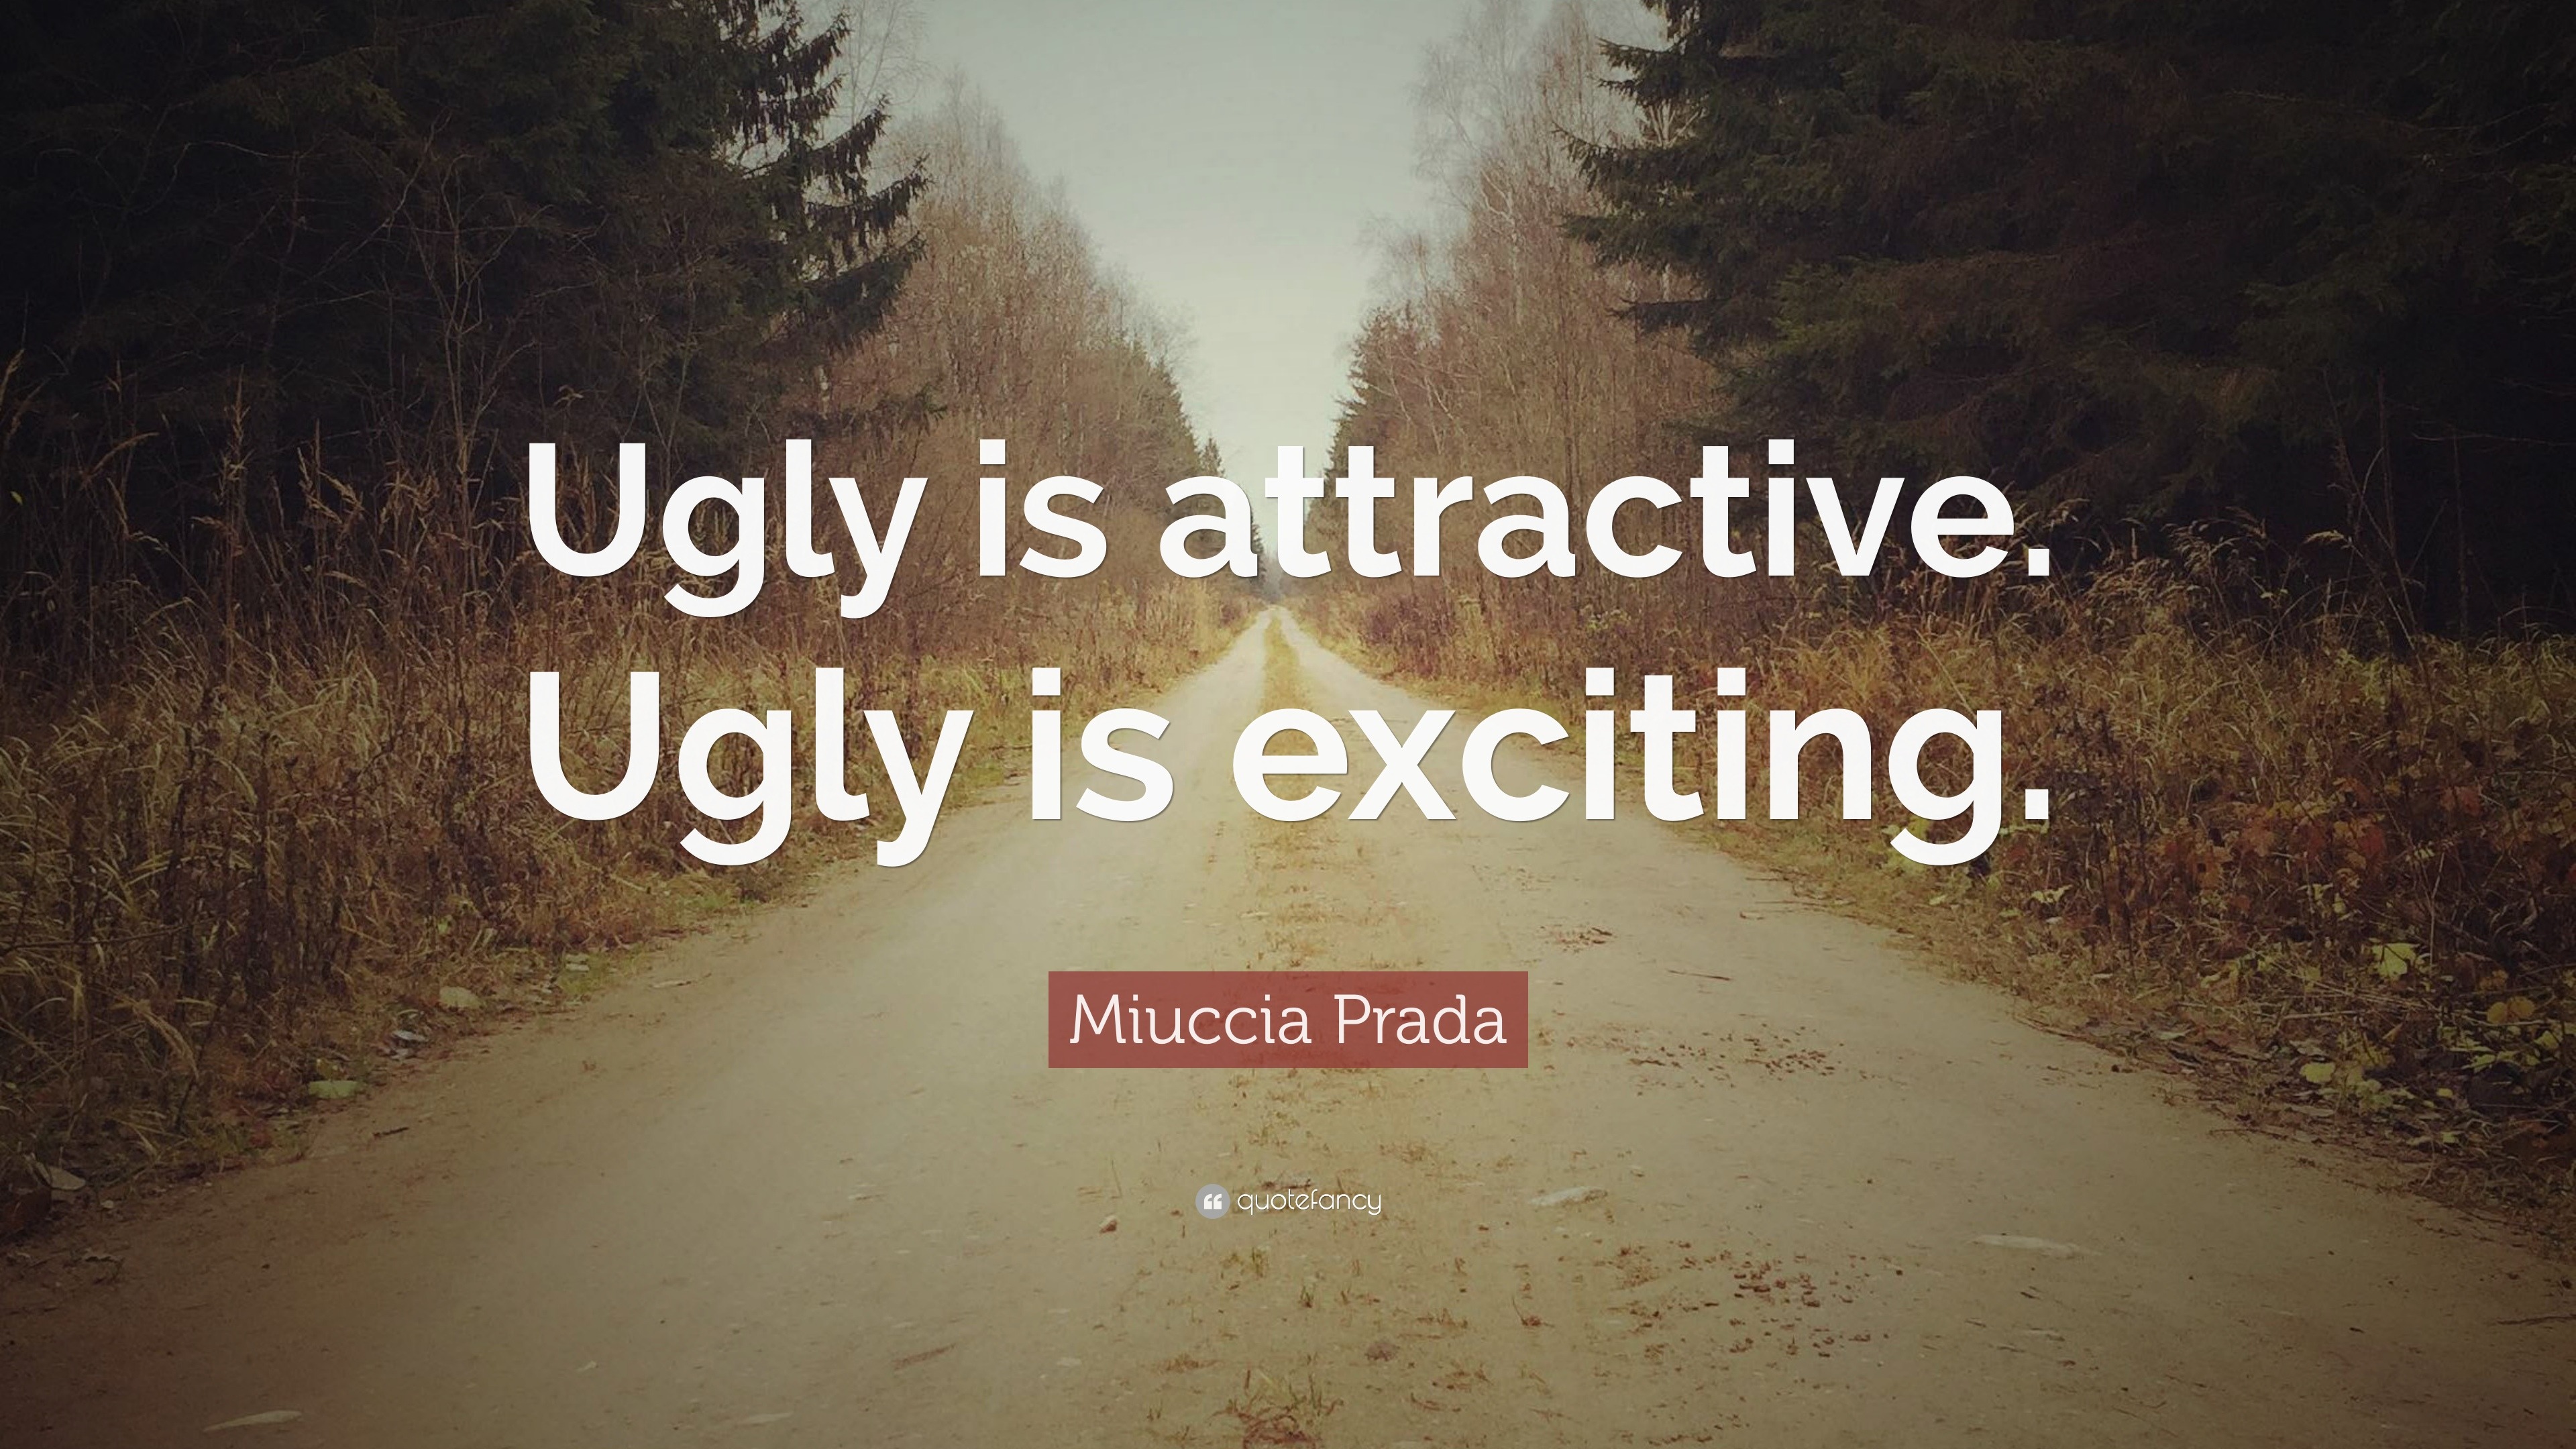 Ugly to attractive